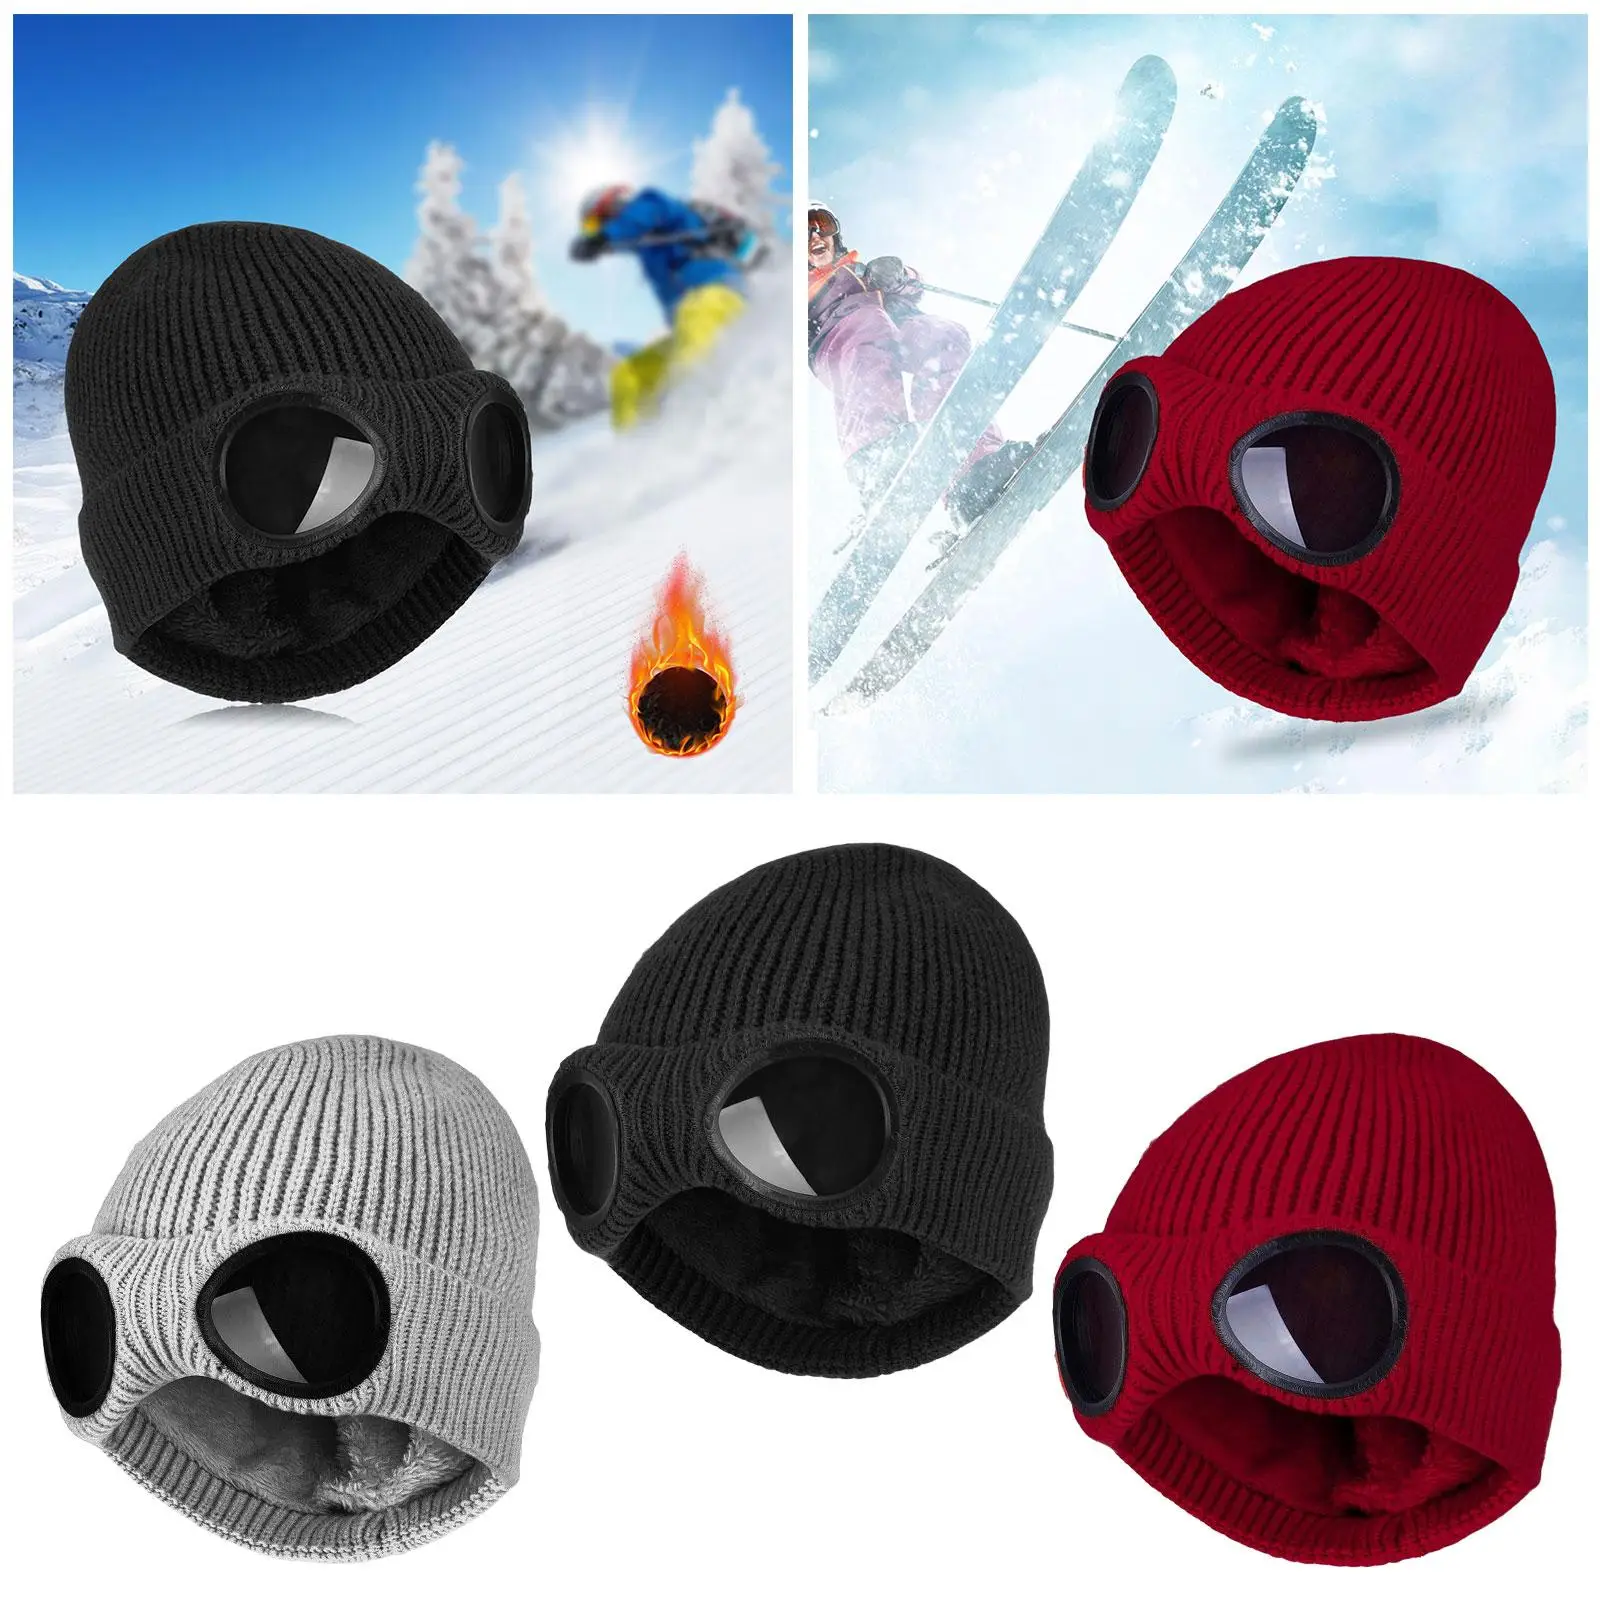 Casual Winter Warm Knit Hats Multi-Function Daily Caps Windproof Thermal Ski Caps for Men Women Unisex Outdoor Sports Running